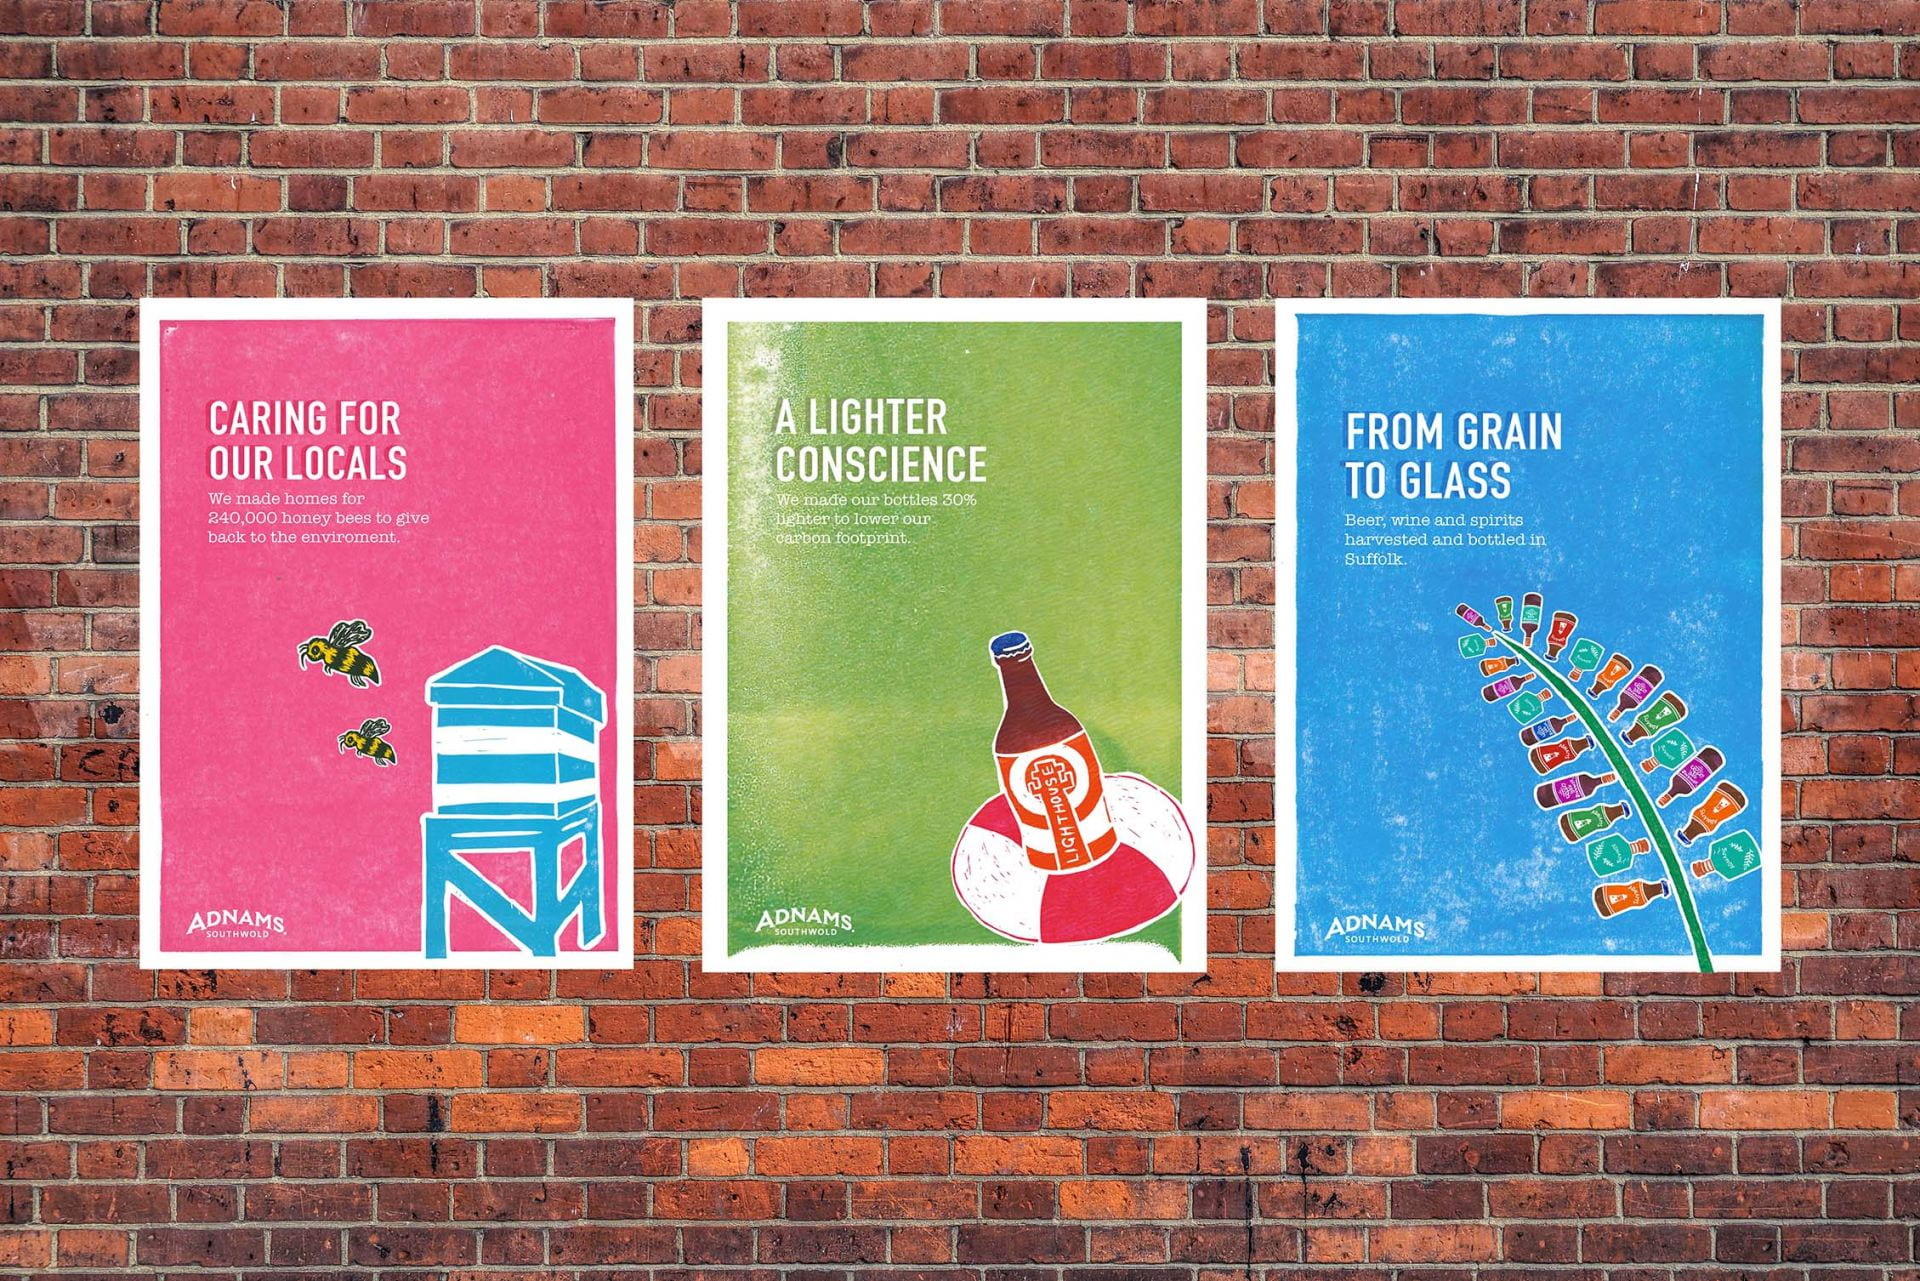 Adnams lino printed poster designs, D&AD New Blood 2018.